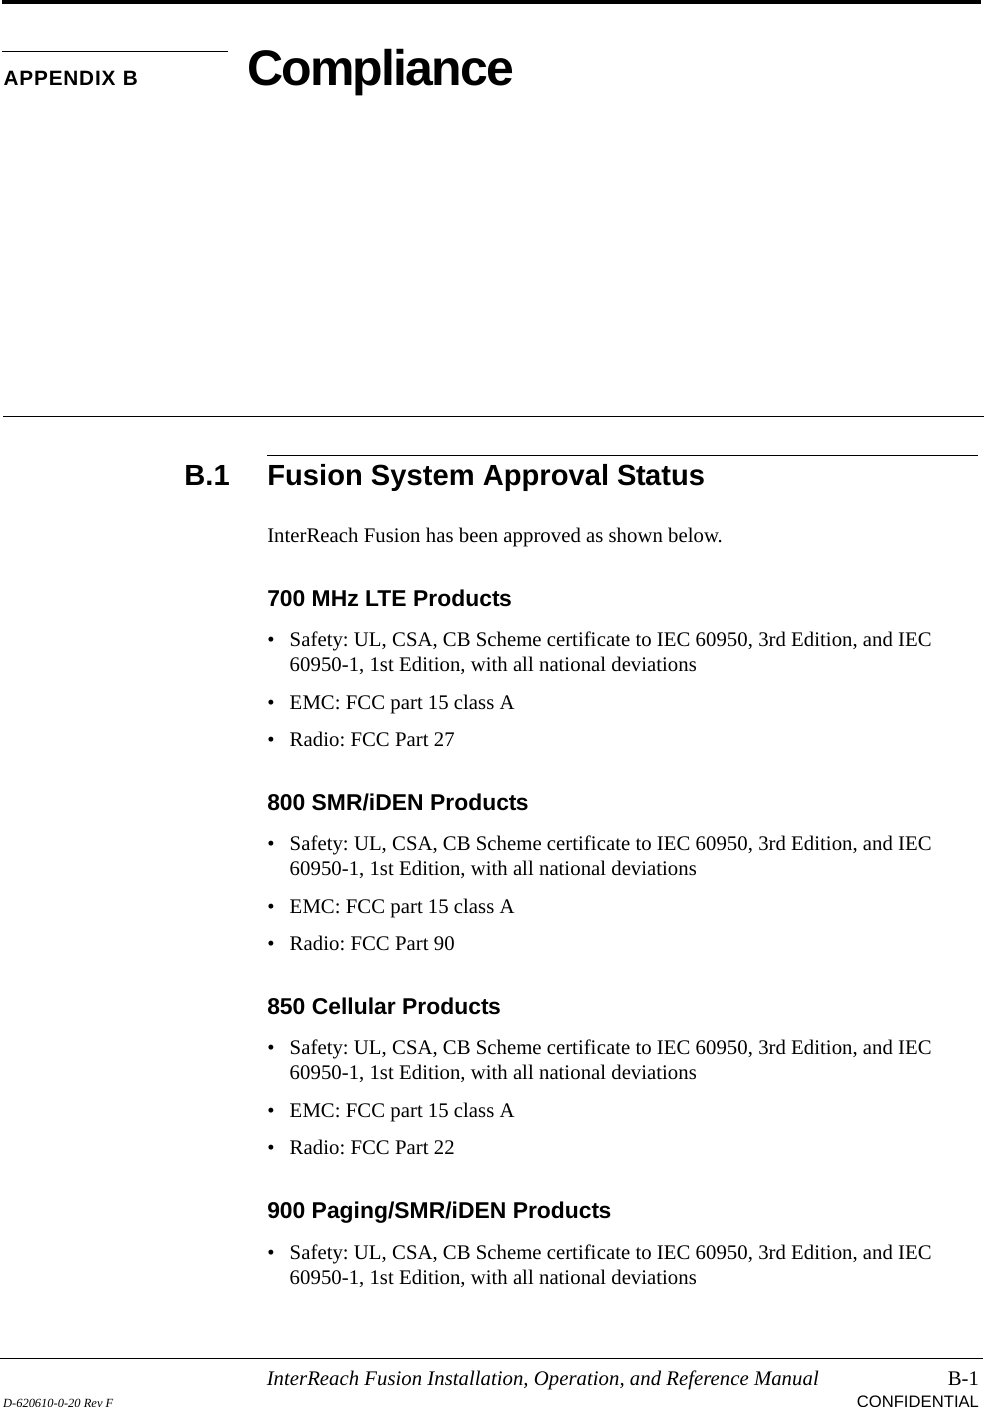 InterReach Fusion Installation, Operation, and Reference Manual B-1D-620610-0-20 Rev F CONFIDENTIALAPPENDIX B ComplianceB.1 Fusion System Approval StatusInterReach Fusion has been approved as shown below.700 MHz LTE Products• Safety: UL, CSA, CB Scheme certificate to IEC 60950, 3rd Edition, and IEC 60950-1, 1st Edition, with all national deviations• EMC: FCC part 15 class A• Radio: FCC Part 27800 SMR/iDEN Products• Safety: UL, CSA, CB Scheme certificate to IEC 60950, 3rd Edition, and IEC 60950-1, 1st Edition, with all national deviations• EMC: FCC part 15 class A• Radio: FCC Part 90850 Cellular Products• Safety: UL, CSA, CB Scheme certificate to IEC 60950, 3rd Edition, and IEC 60950-1, 1st Edition, with all national deviations• EMC: FCC part 15 class A• Radio: FCC Part 22900 Paging/SMR/iDEN Products• Safety: UL, CSA, CB Scheme certificate to IEC 60950, 3rd Edition, and IEC 60950-1, 1st Edition, with all national deviations